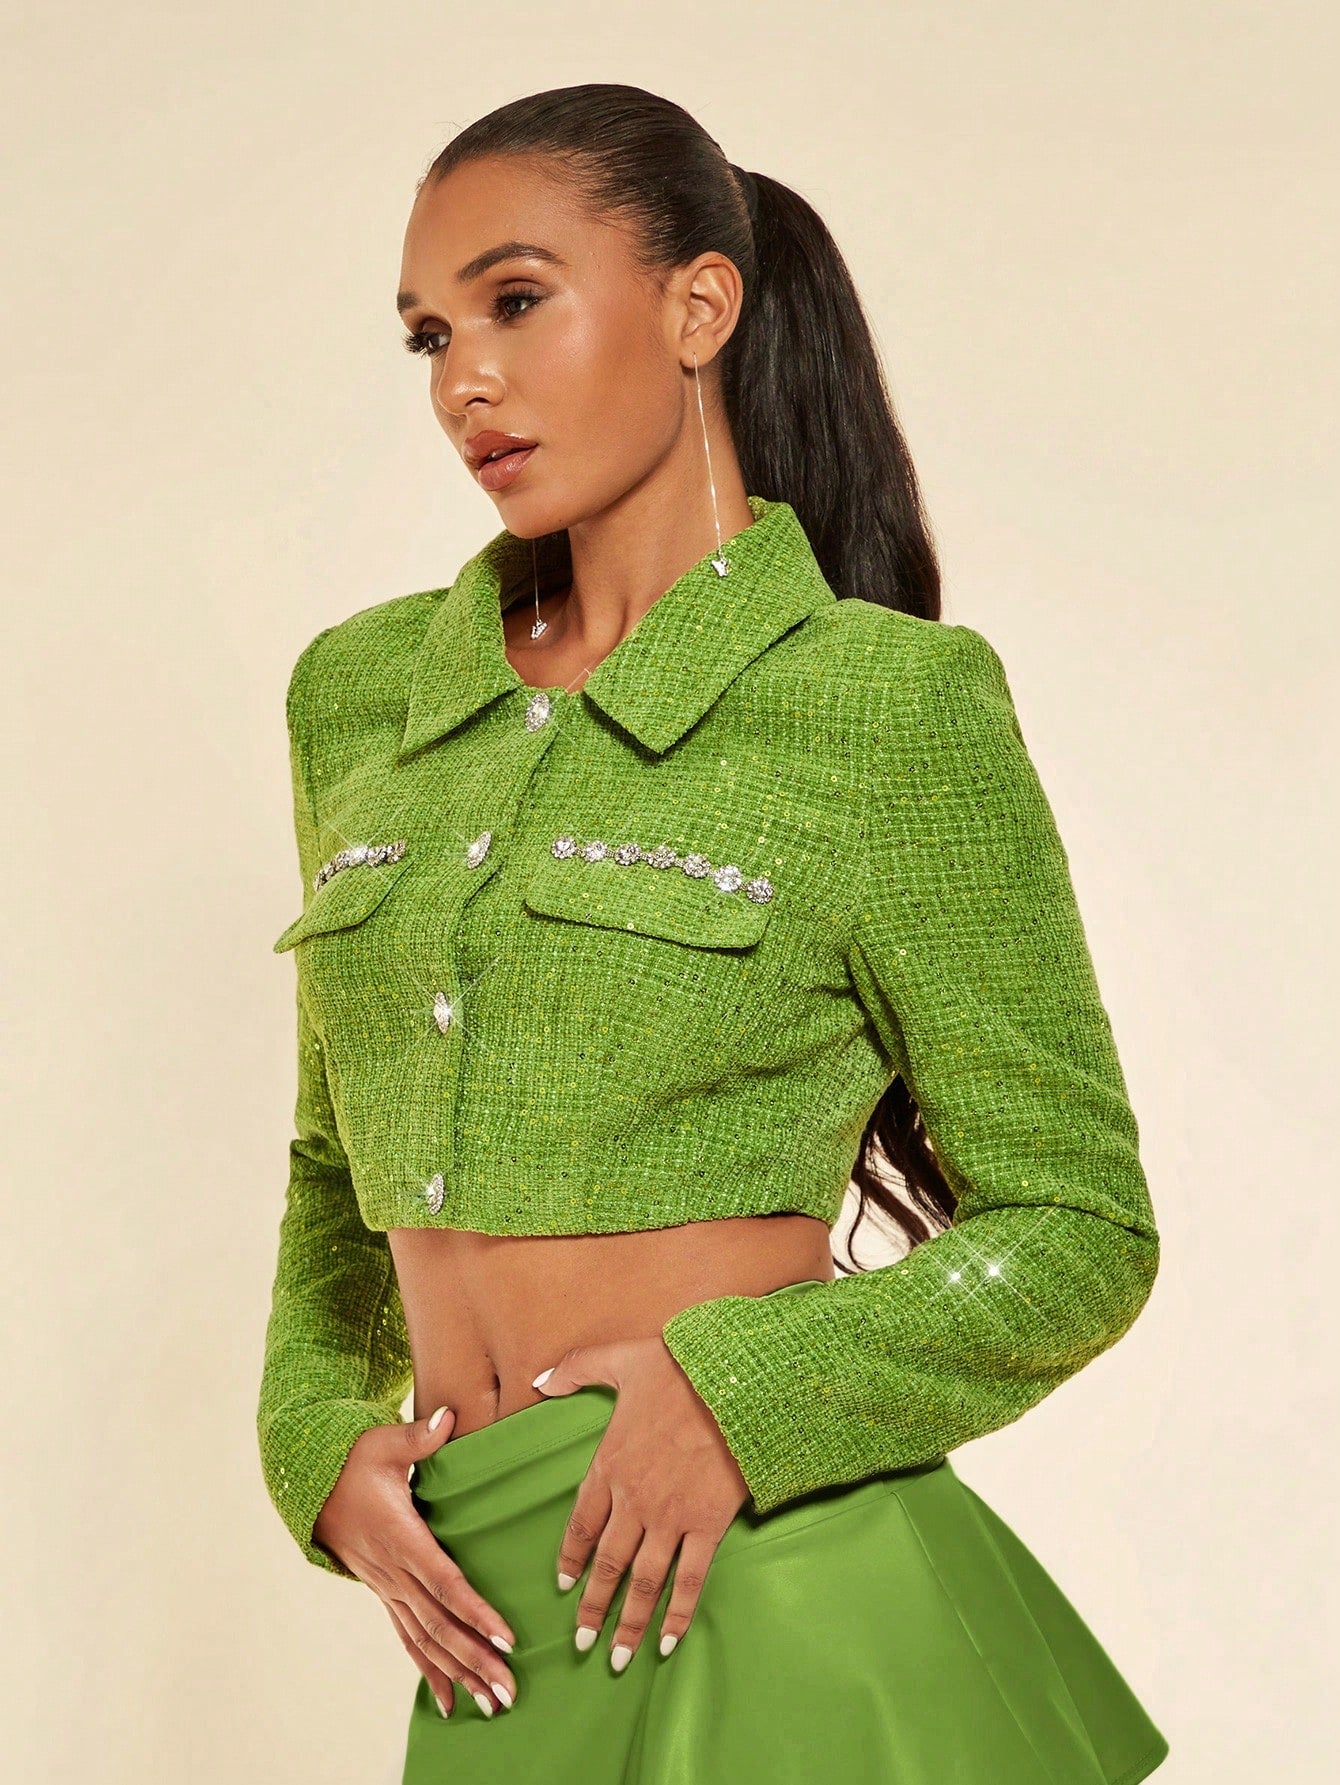 model posing for a professional photoshoot and a product picture, she wears a Green glitter jacket and silver jewelry